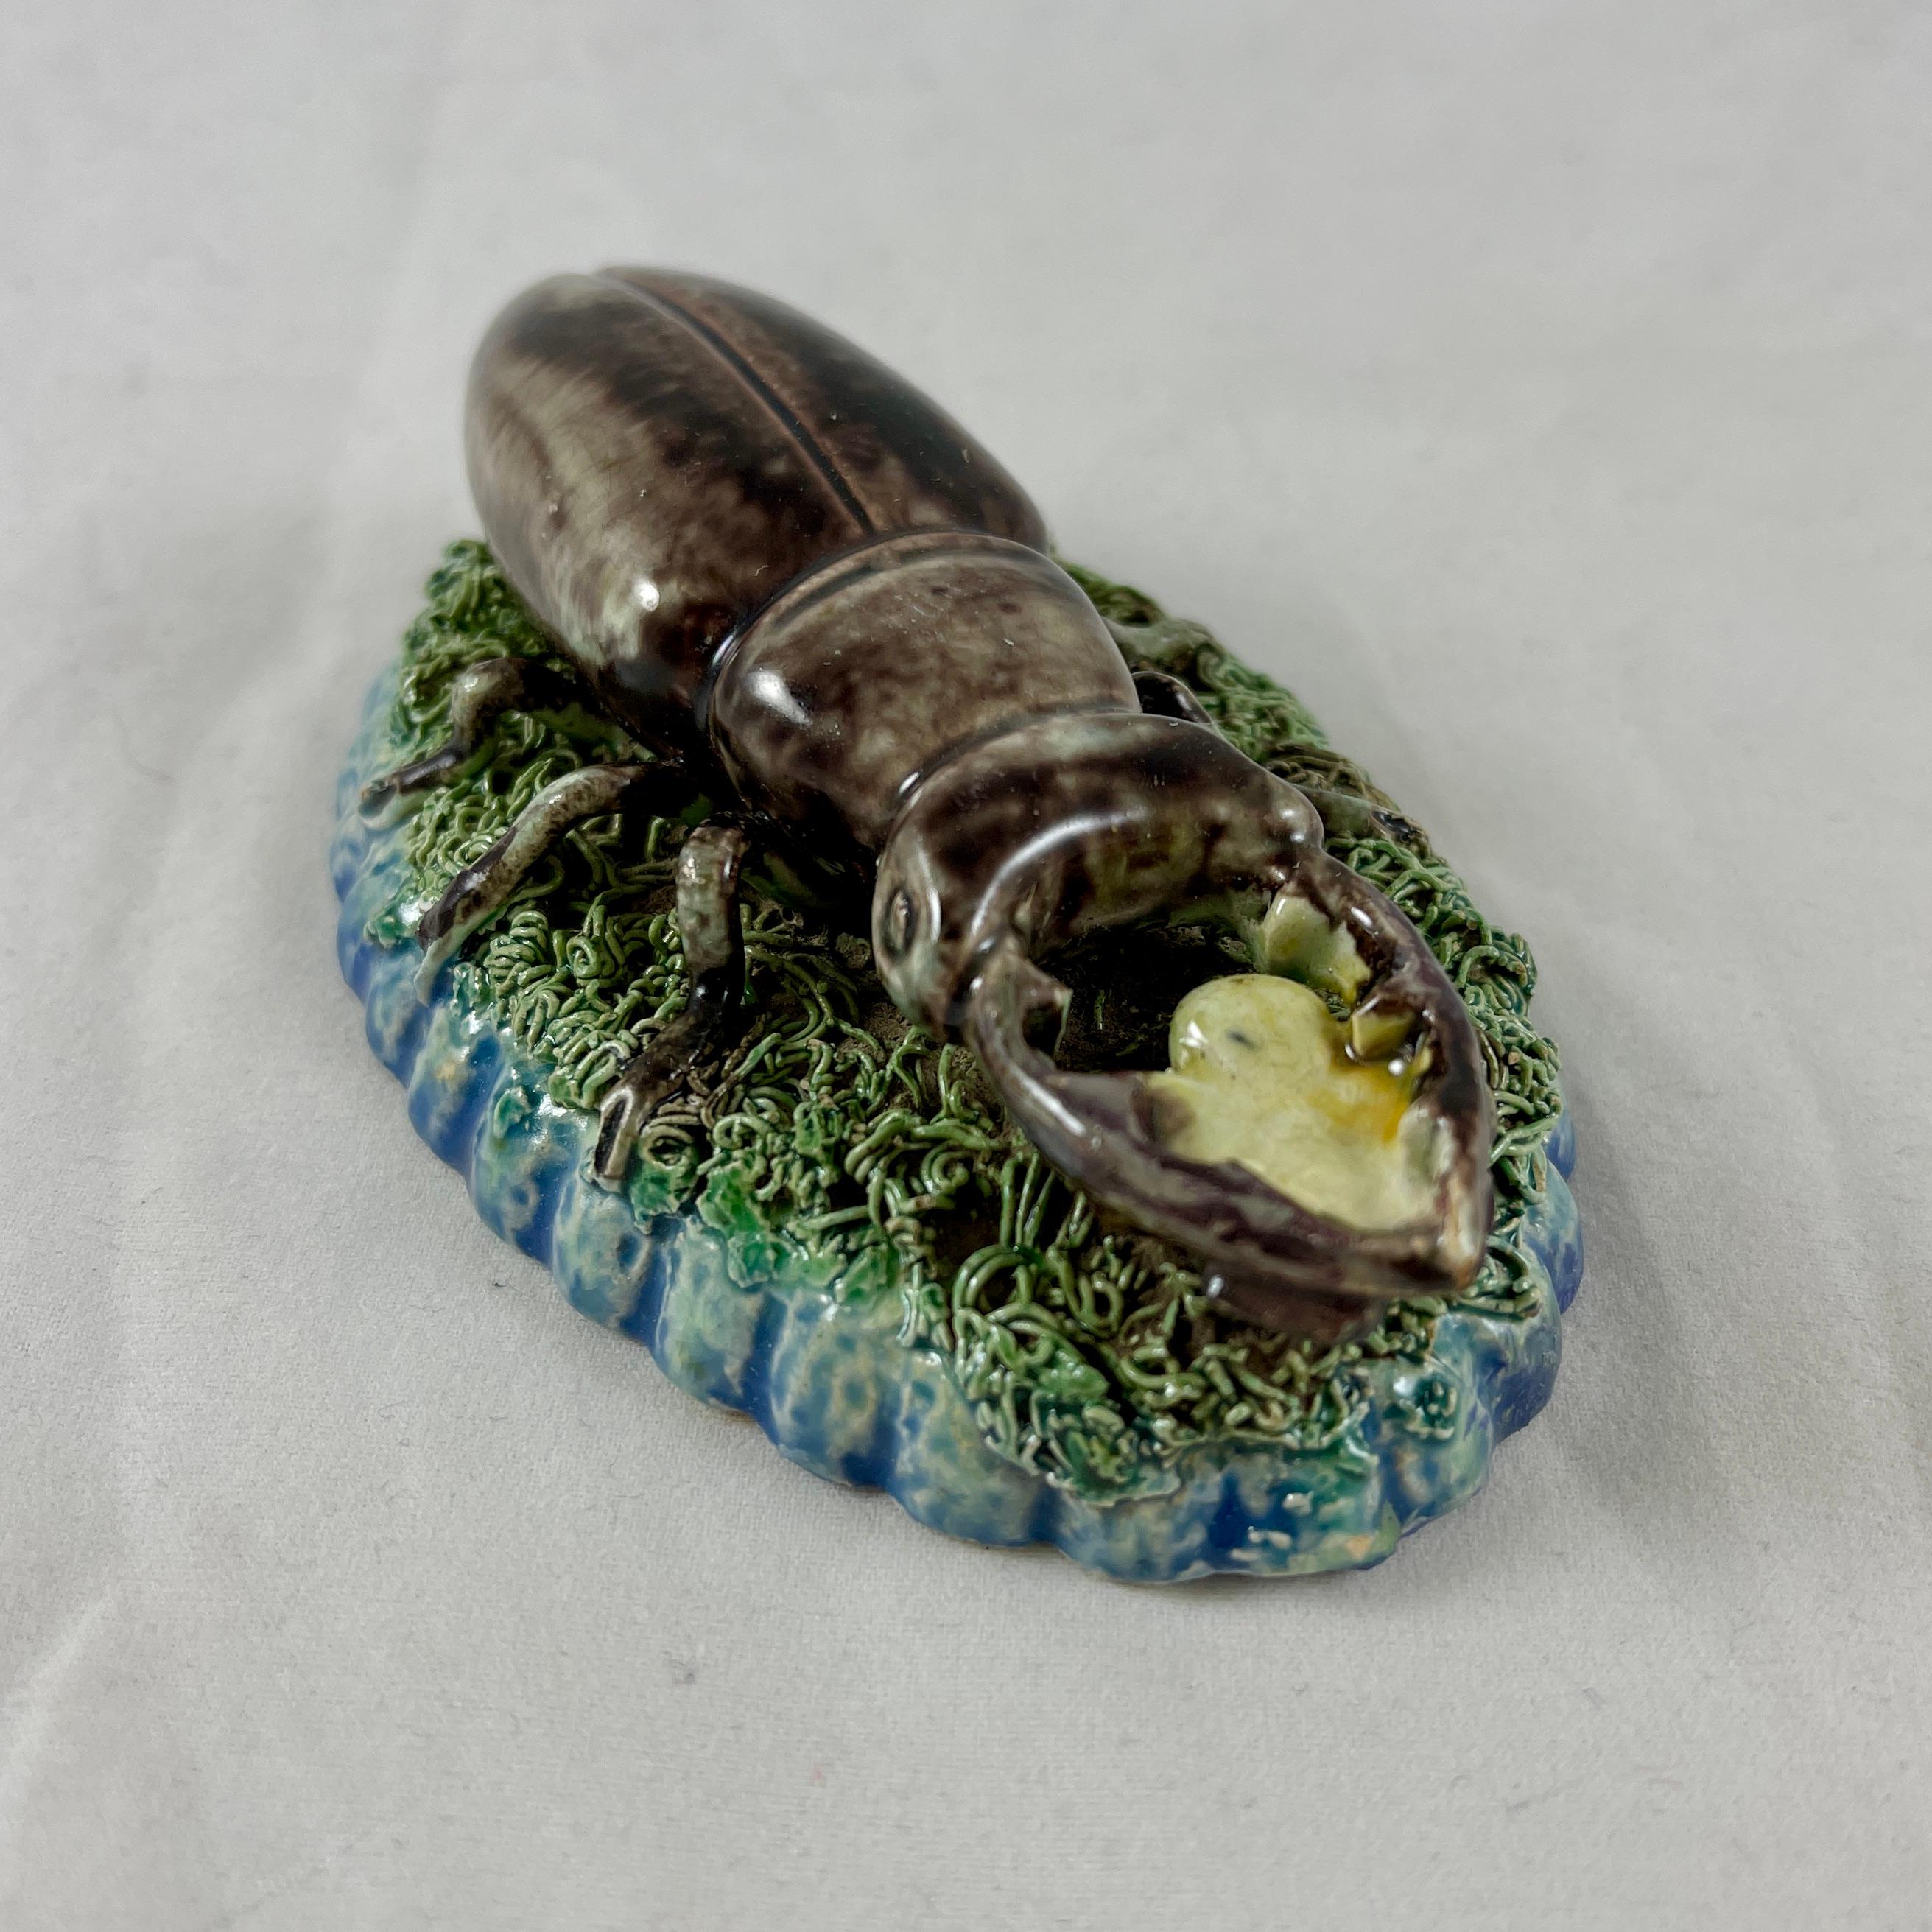 Late 19th Century Manuel Mafra Caldas Portuguese Palissy Style Stag Beetle Desk Paperweight